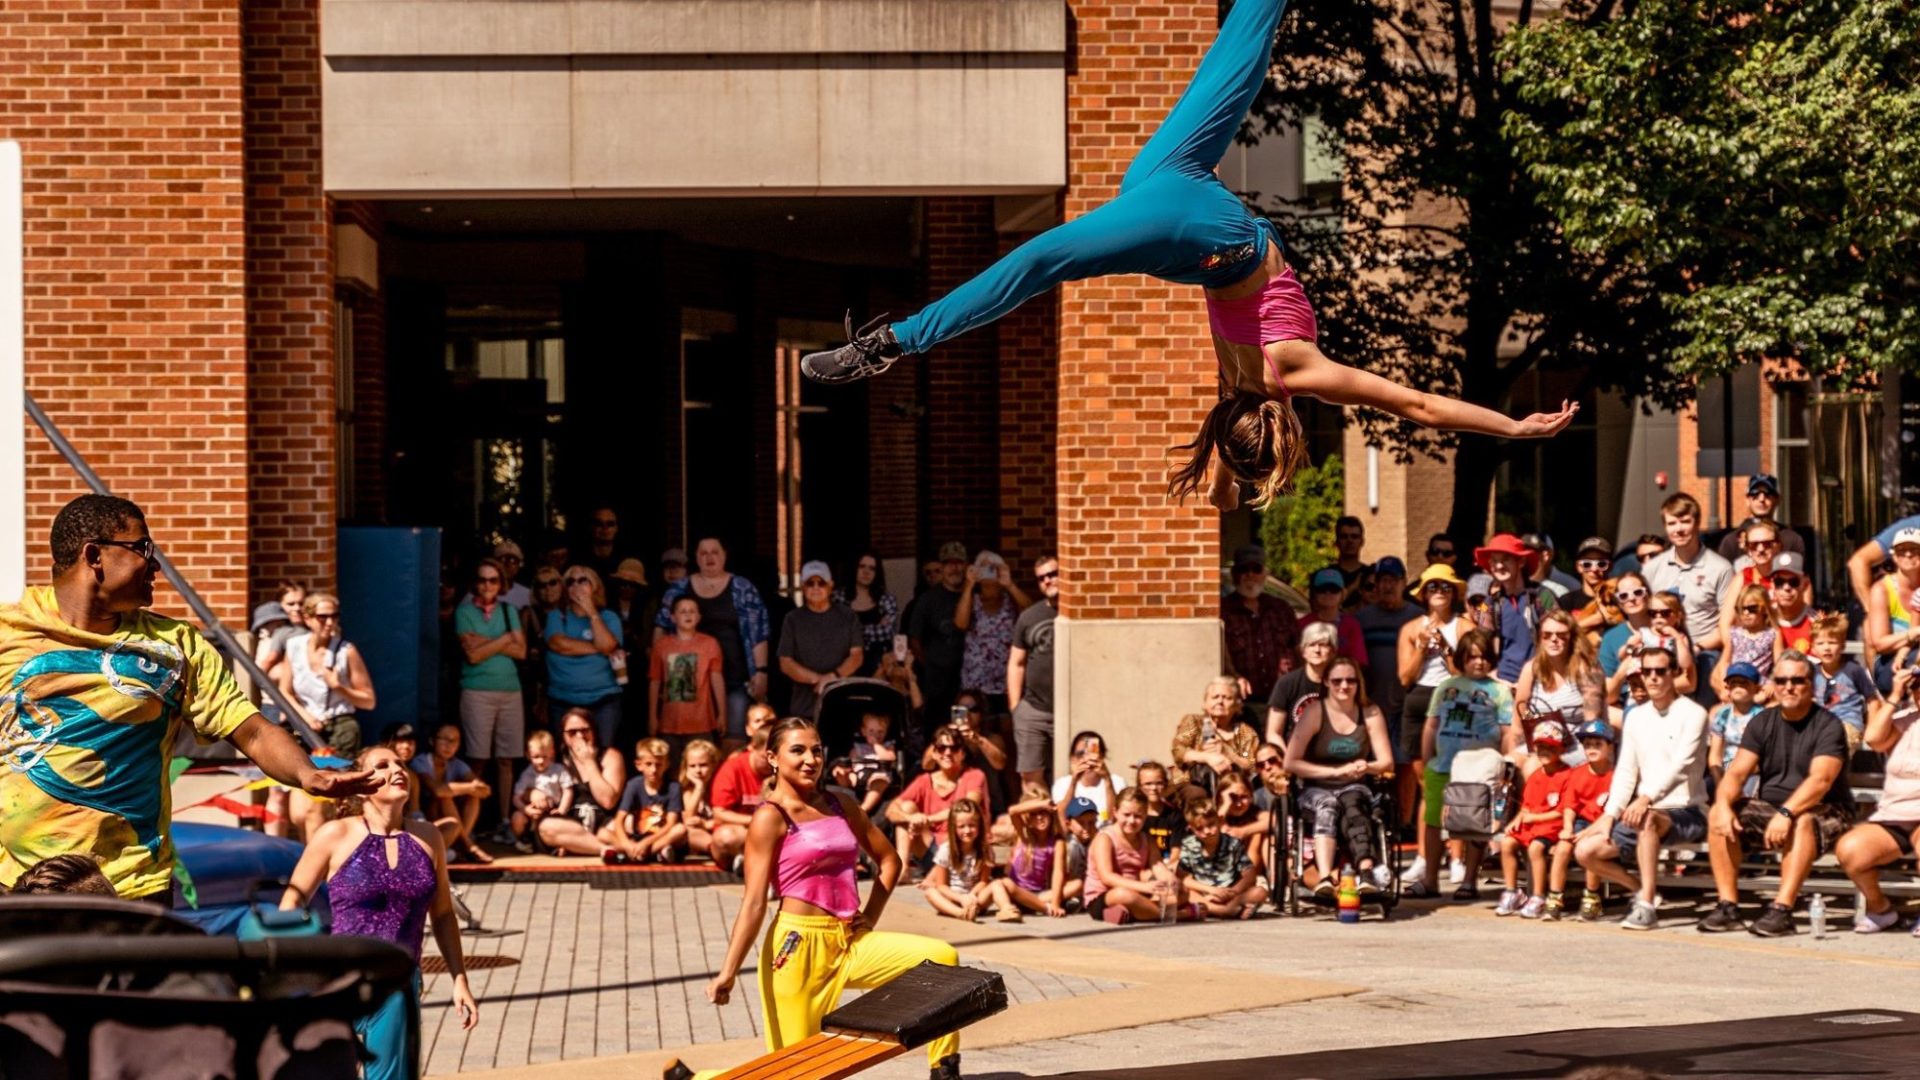 A circus peformer is mid-flip, high in the air, while a crowd looks on.